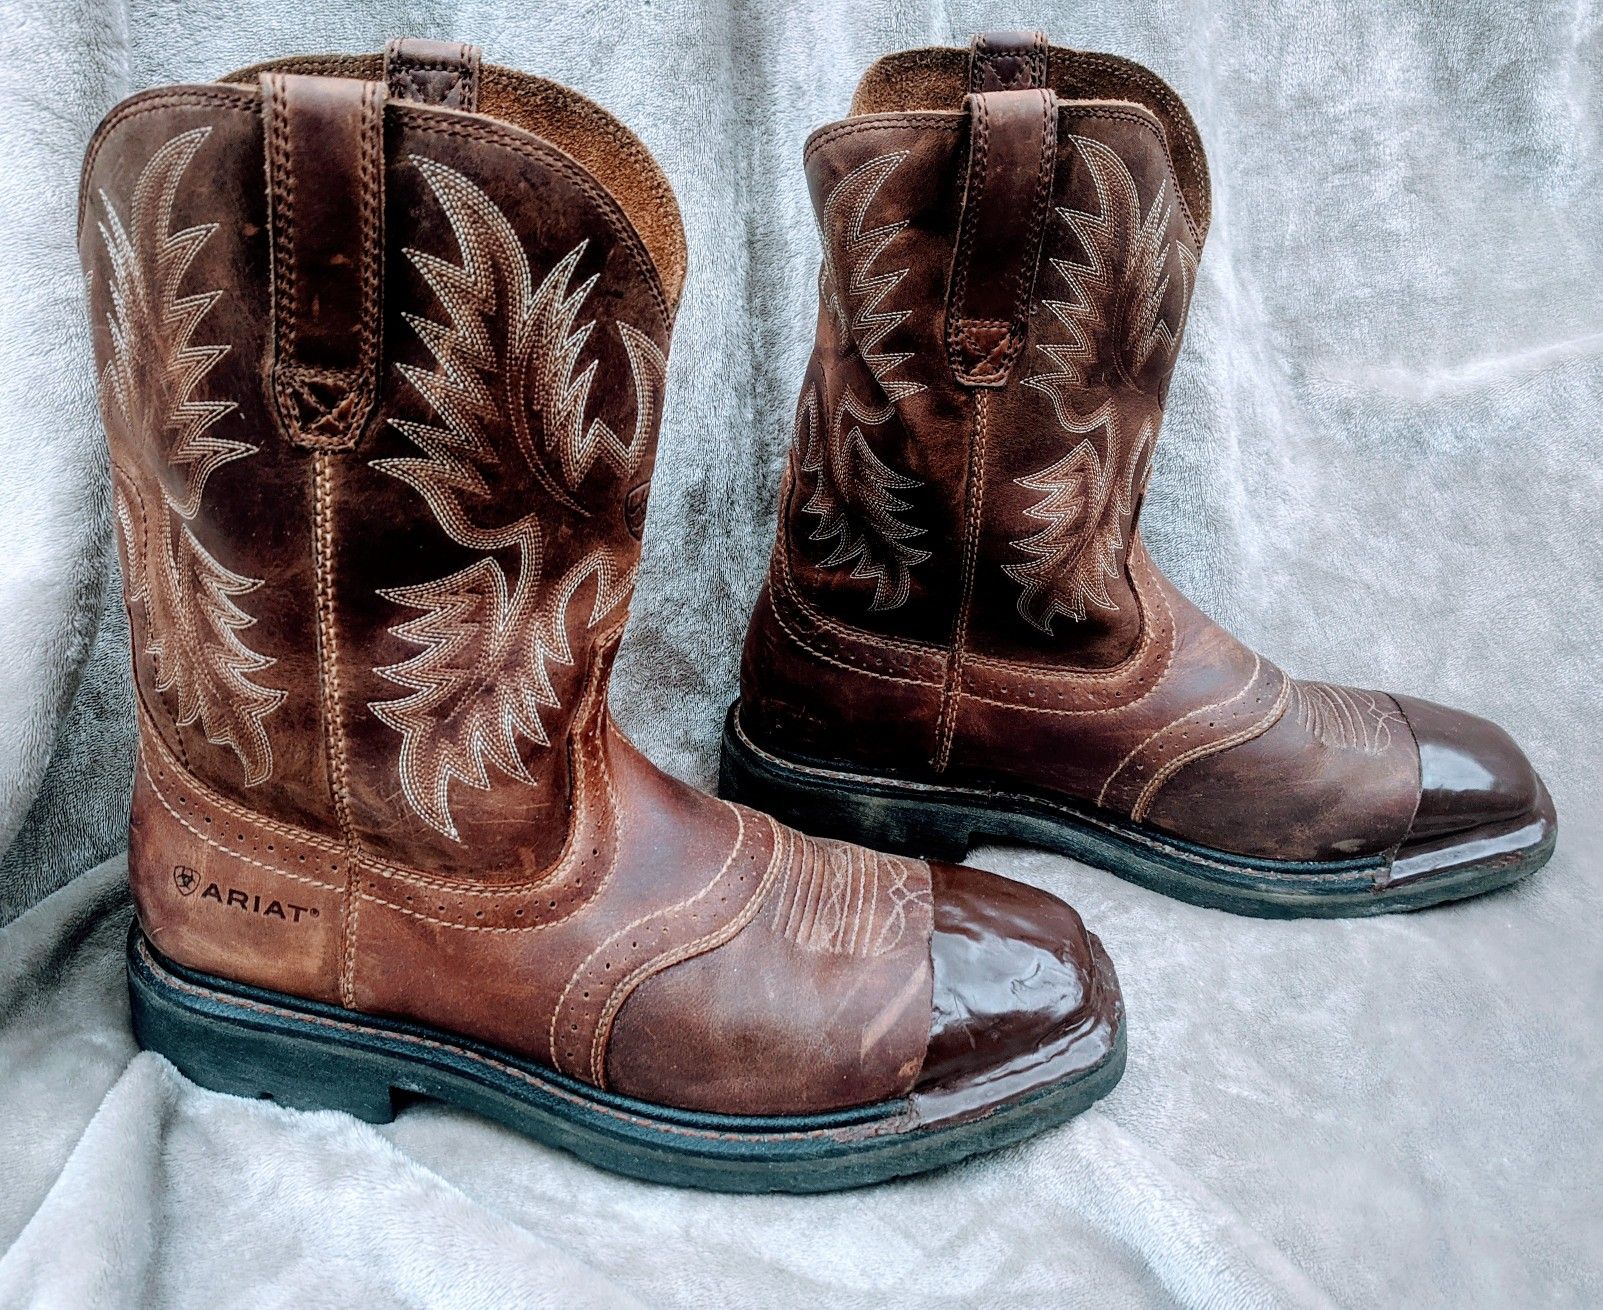 Ariat Men's Leather Work Boots Size 10.5 EE